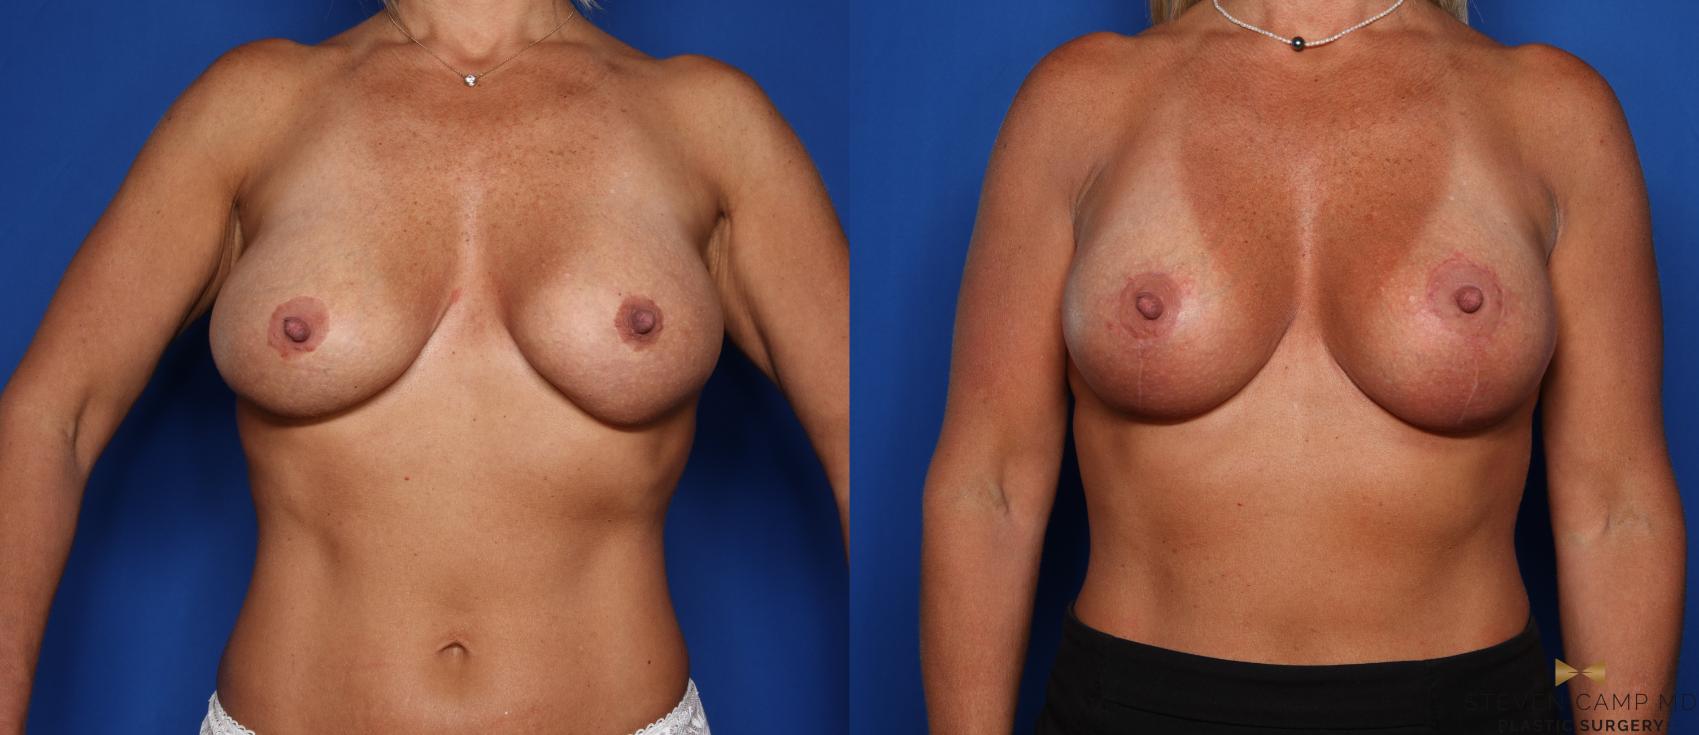 Breast Implant Exchange, Mastopexy & Internal Bra Before & After Photo | Fort Worth, Texas | Steven Camp MD Plastic Surgery